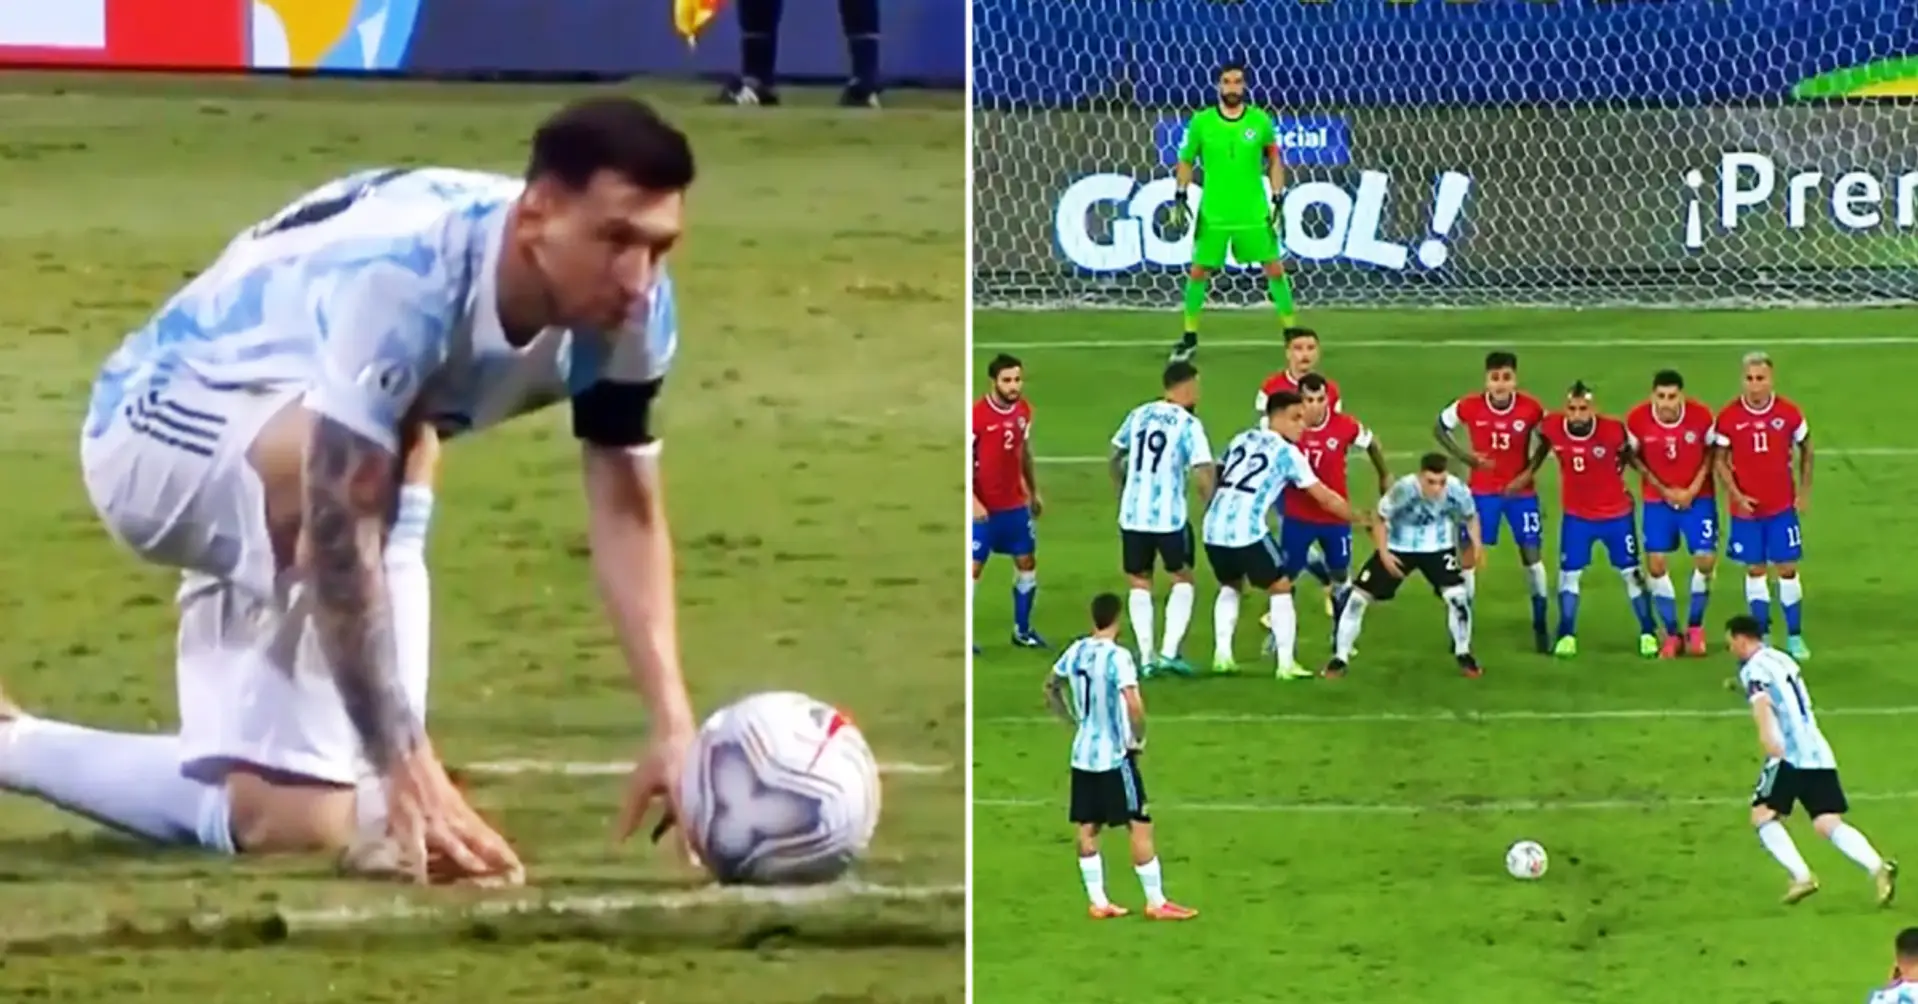 ‘Secret of his success’: Leo Messi’s unique preparations for free kick caught on camera, goes viral